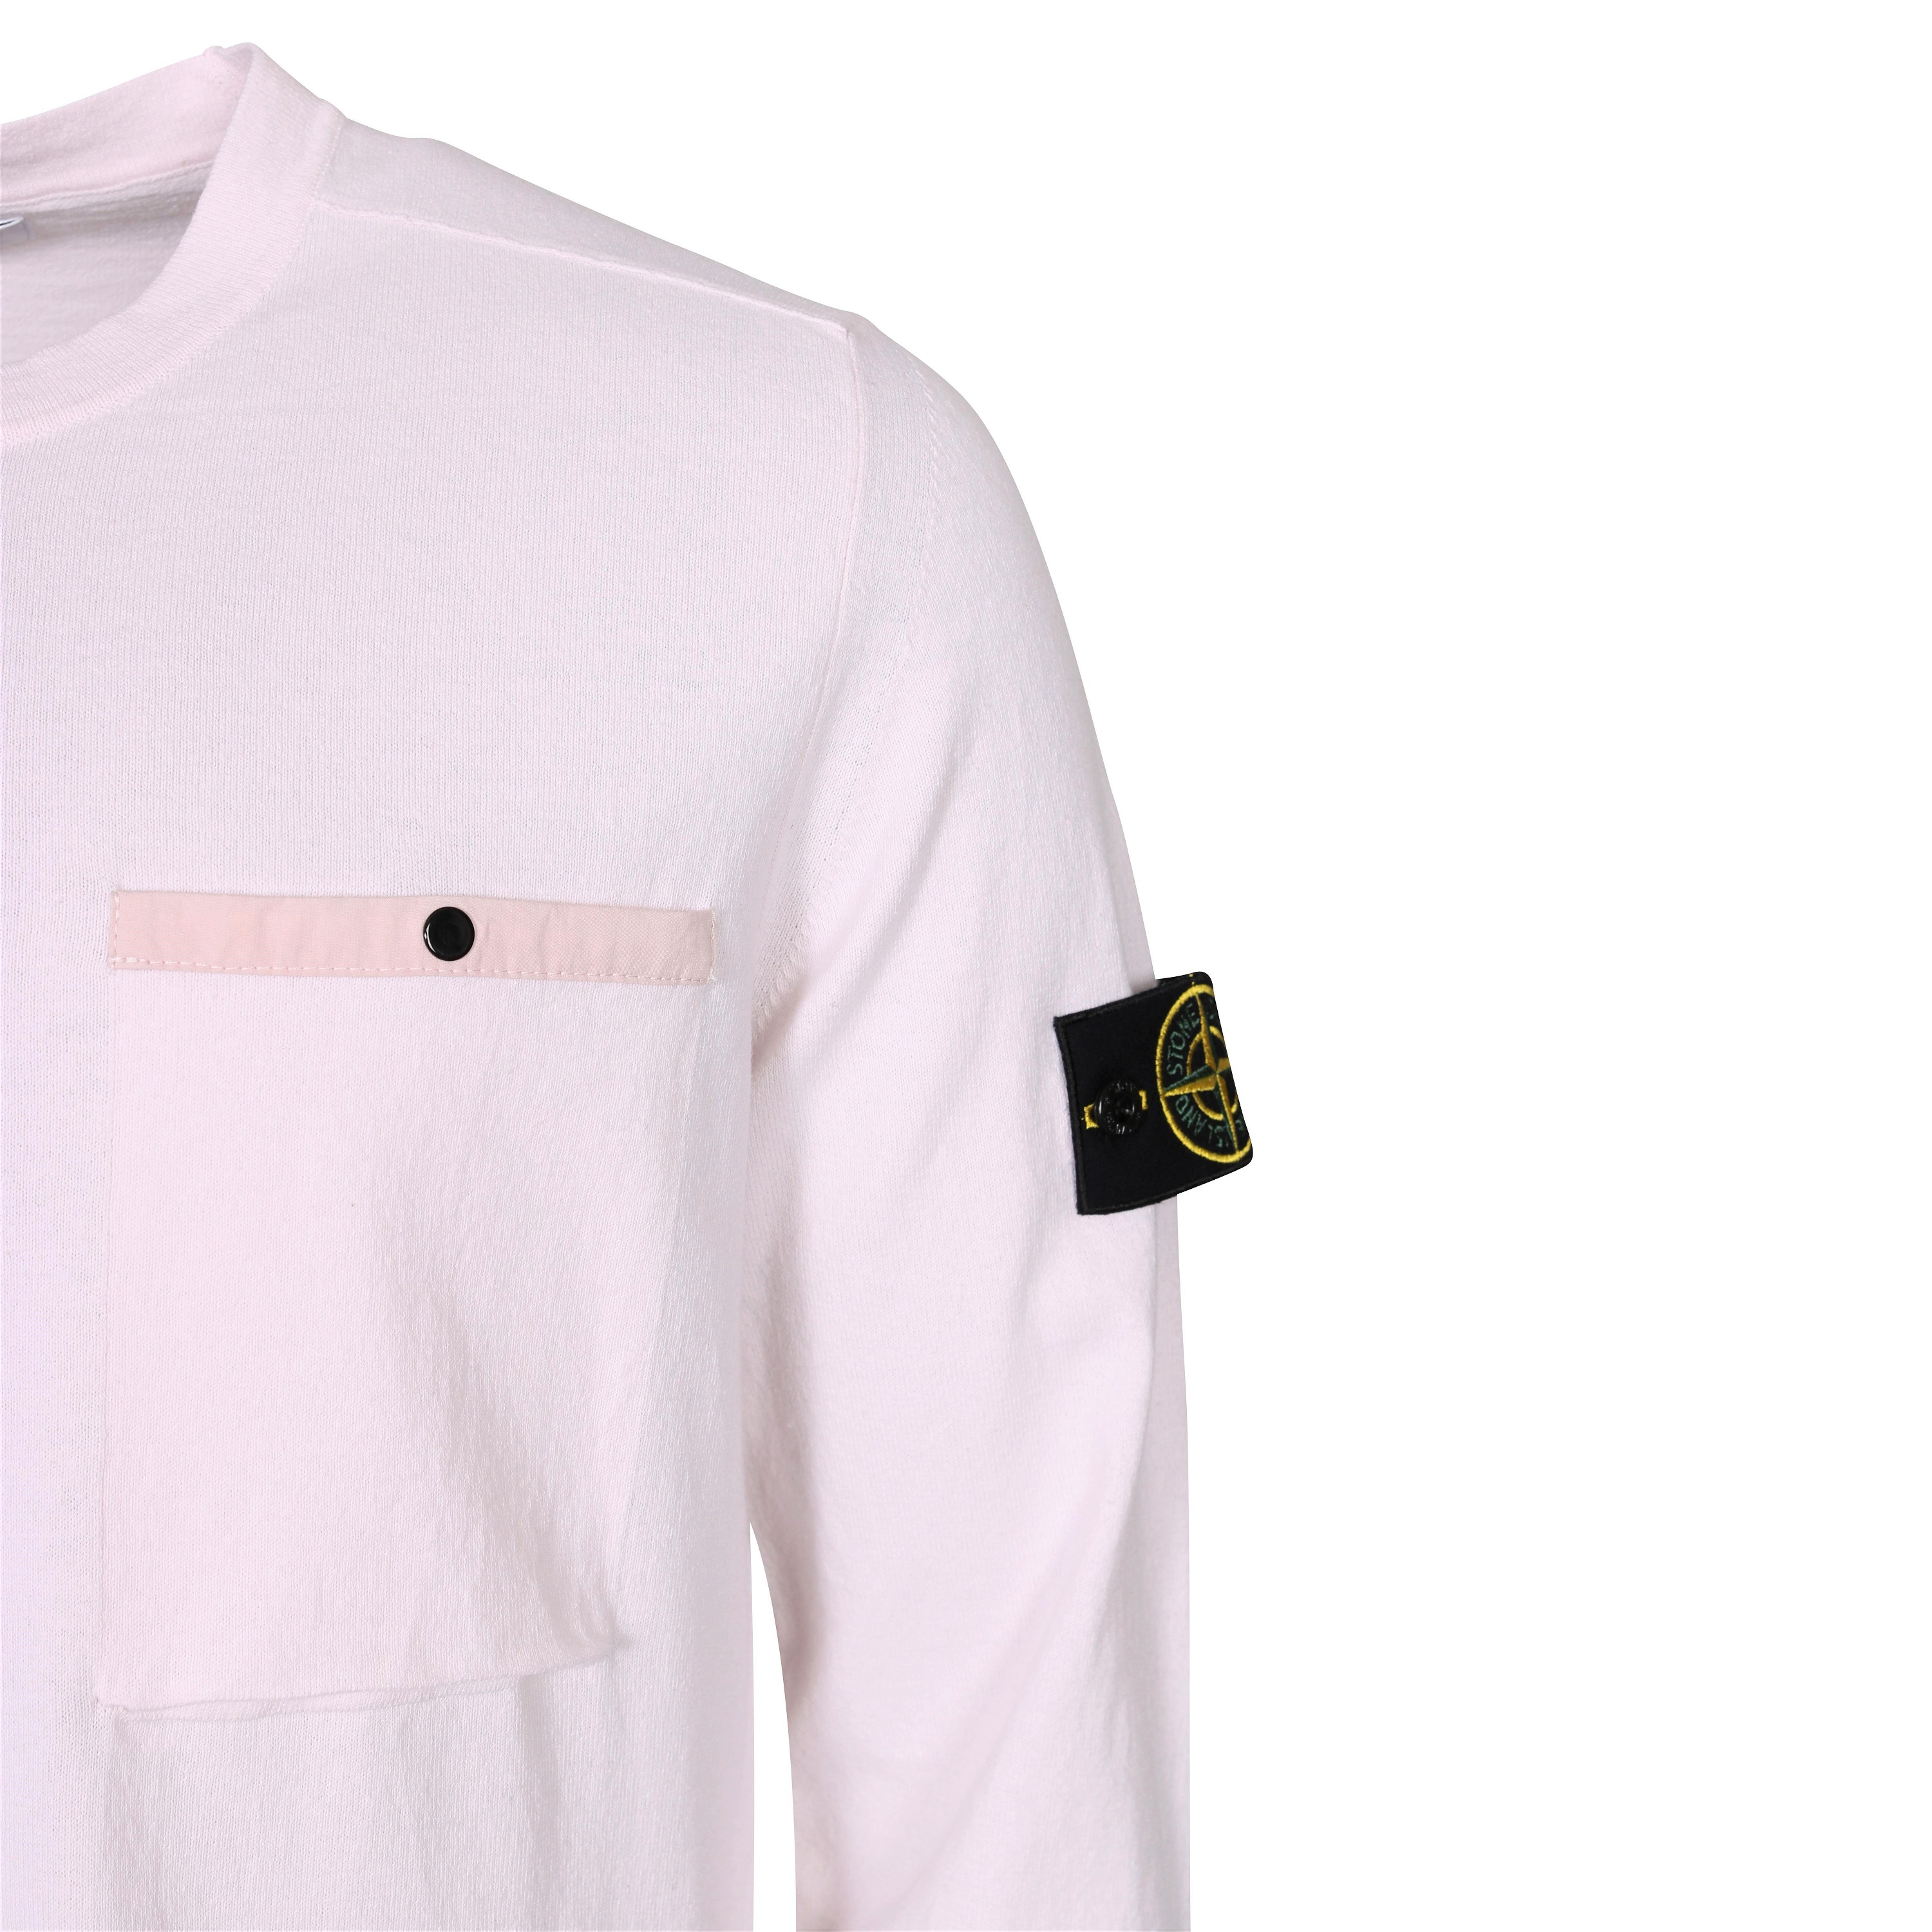 Stone Island Chest Pocket Knit Sweater in Light Pink XL